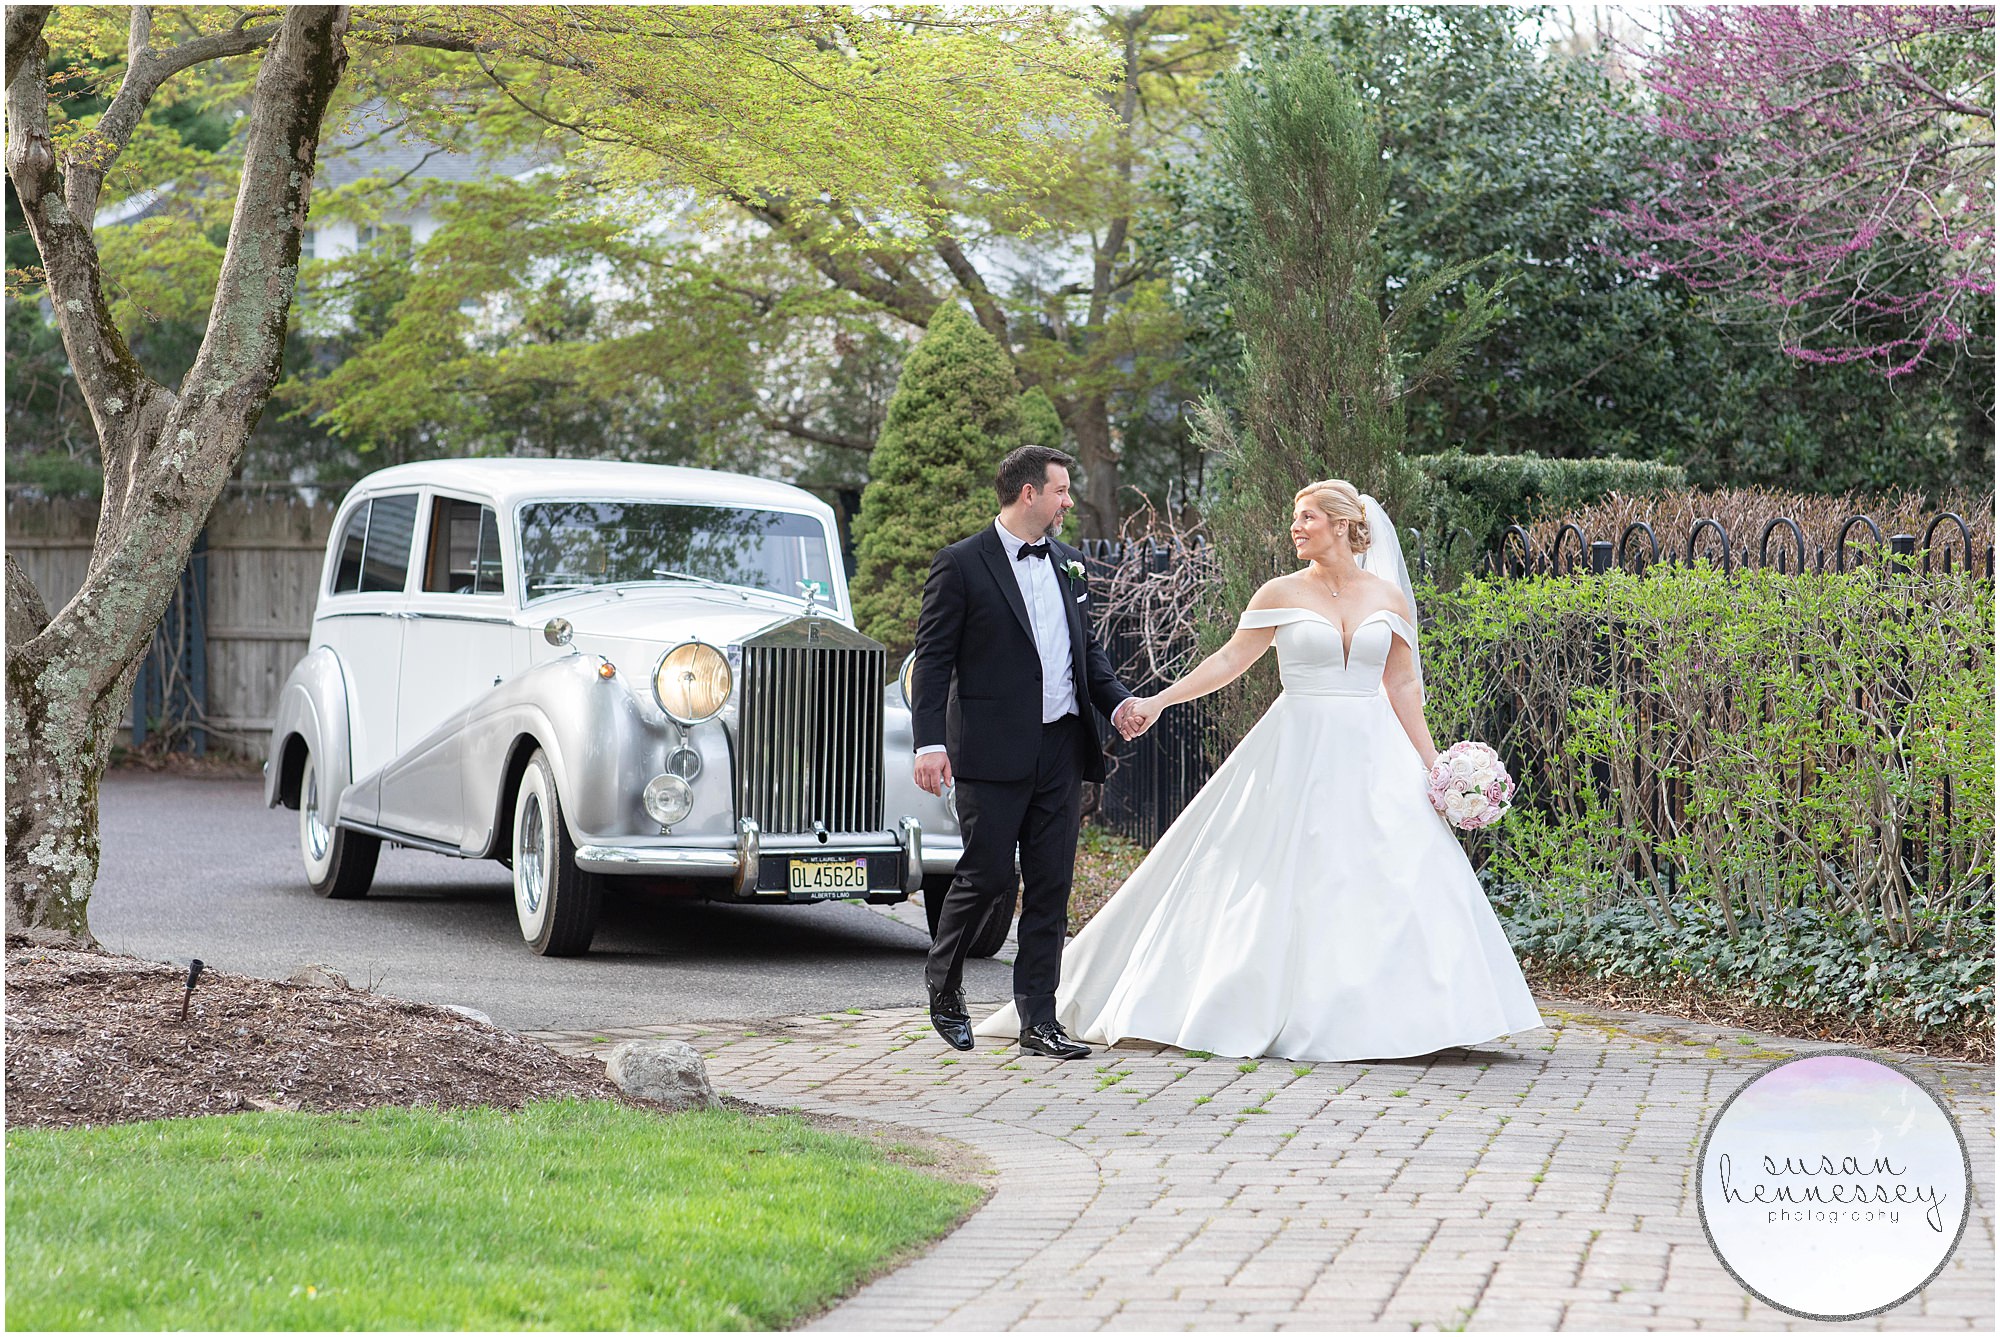 Planning a Micro Wedding? A vintage Rolls Royce is the perfect vehicle to rent!